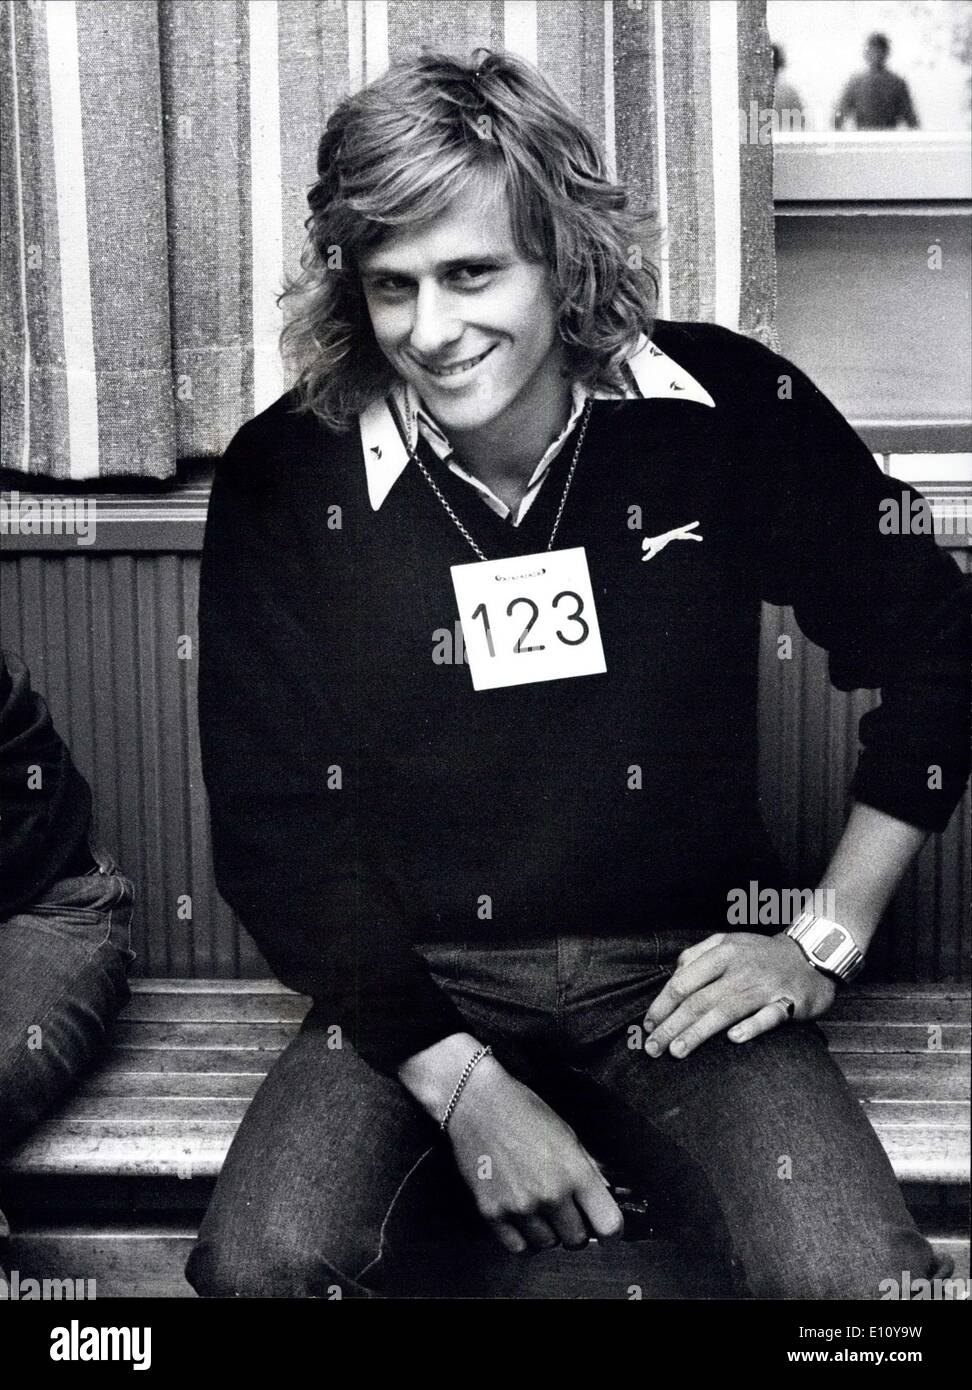 Oct. 03, 1974 - Bjorn Borg reports at army National Service Center: Like other Swedish 18 year old, Bjorn Borg, the young golden boy of tennis, this week reported to an Army national service center in Stockholm, where he completed medical and aptitude tests. Because he spends more than six months abroad each year it is unlikely that he will be called up. Bjorn Borg, Nr.123, During a break at the Army enlistment central. Stock Photo